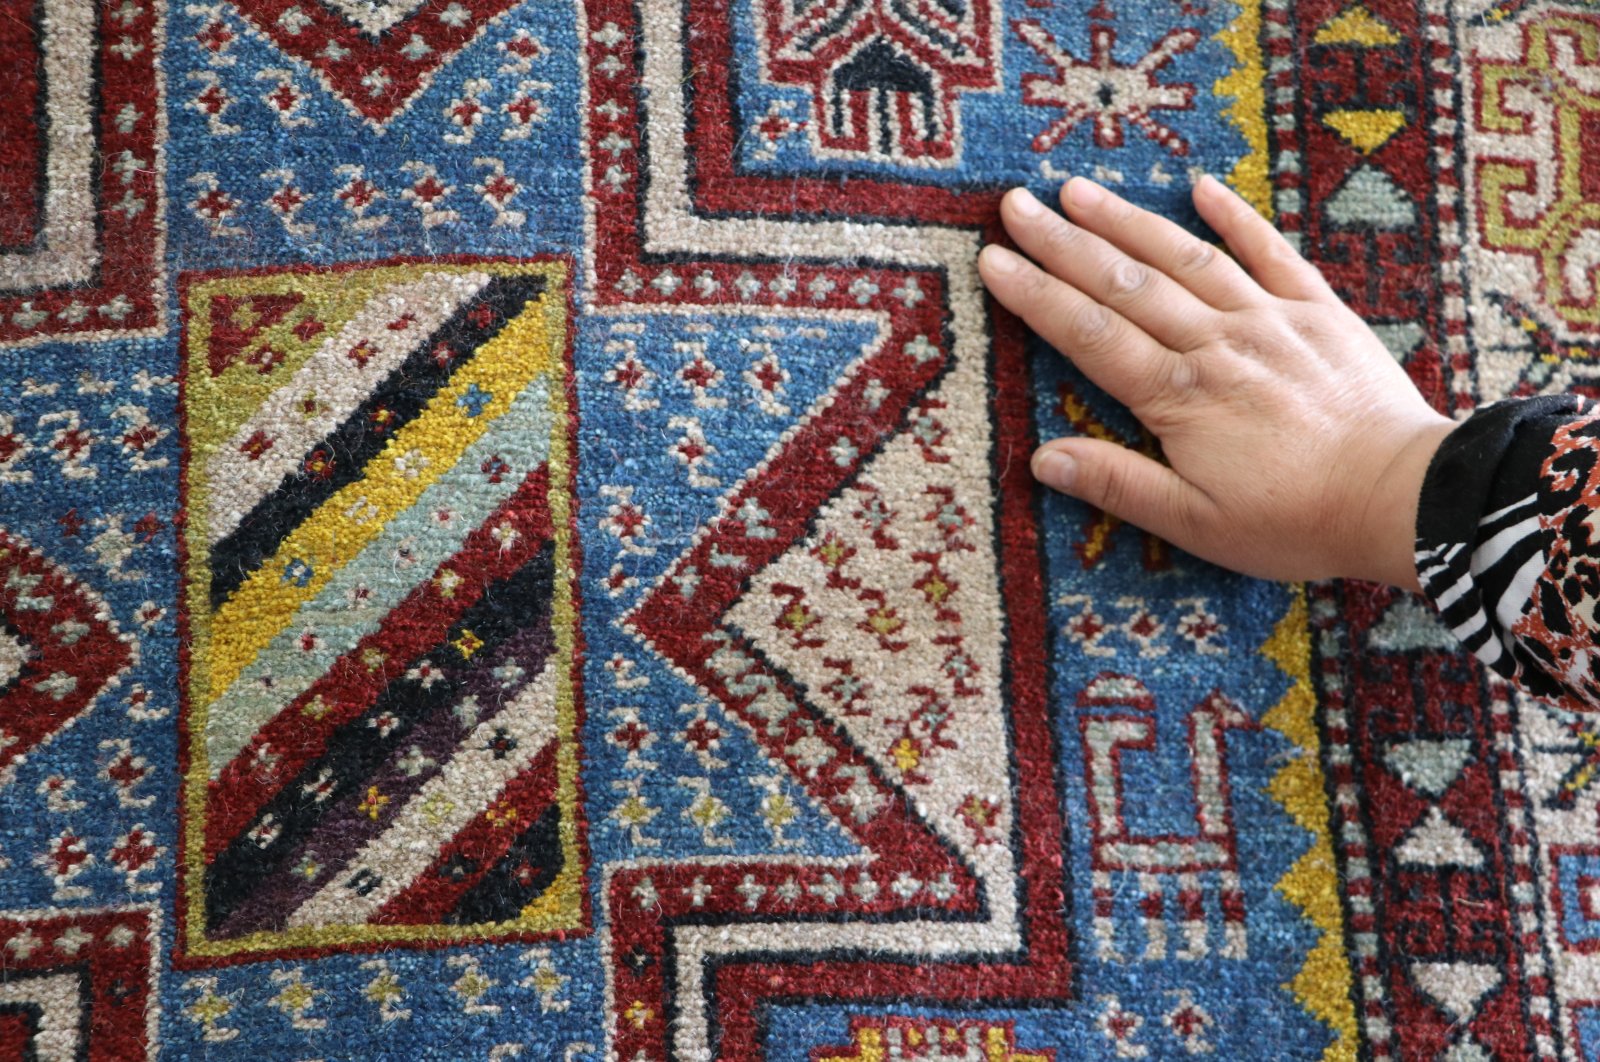 A Turkish carpet produced by women using traditional and natural methods in the Oğuzeli district of Gaziantep, Türkiye, Oct. 31, 2022. (AA Photo)